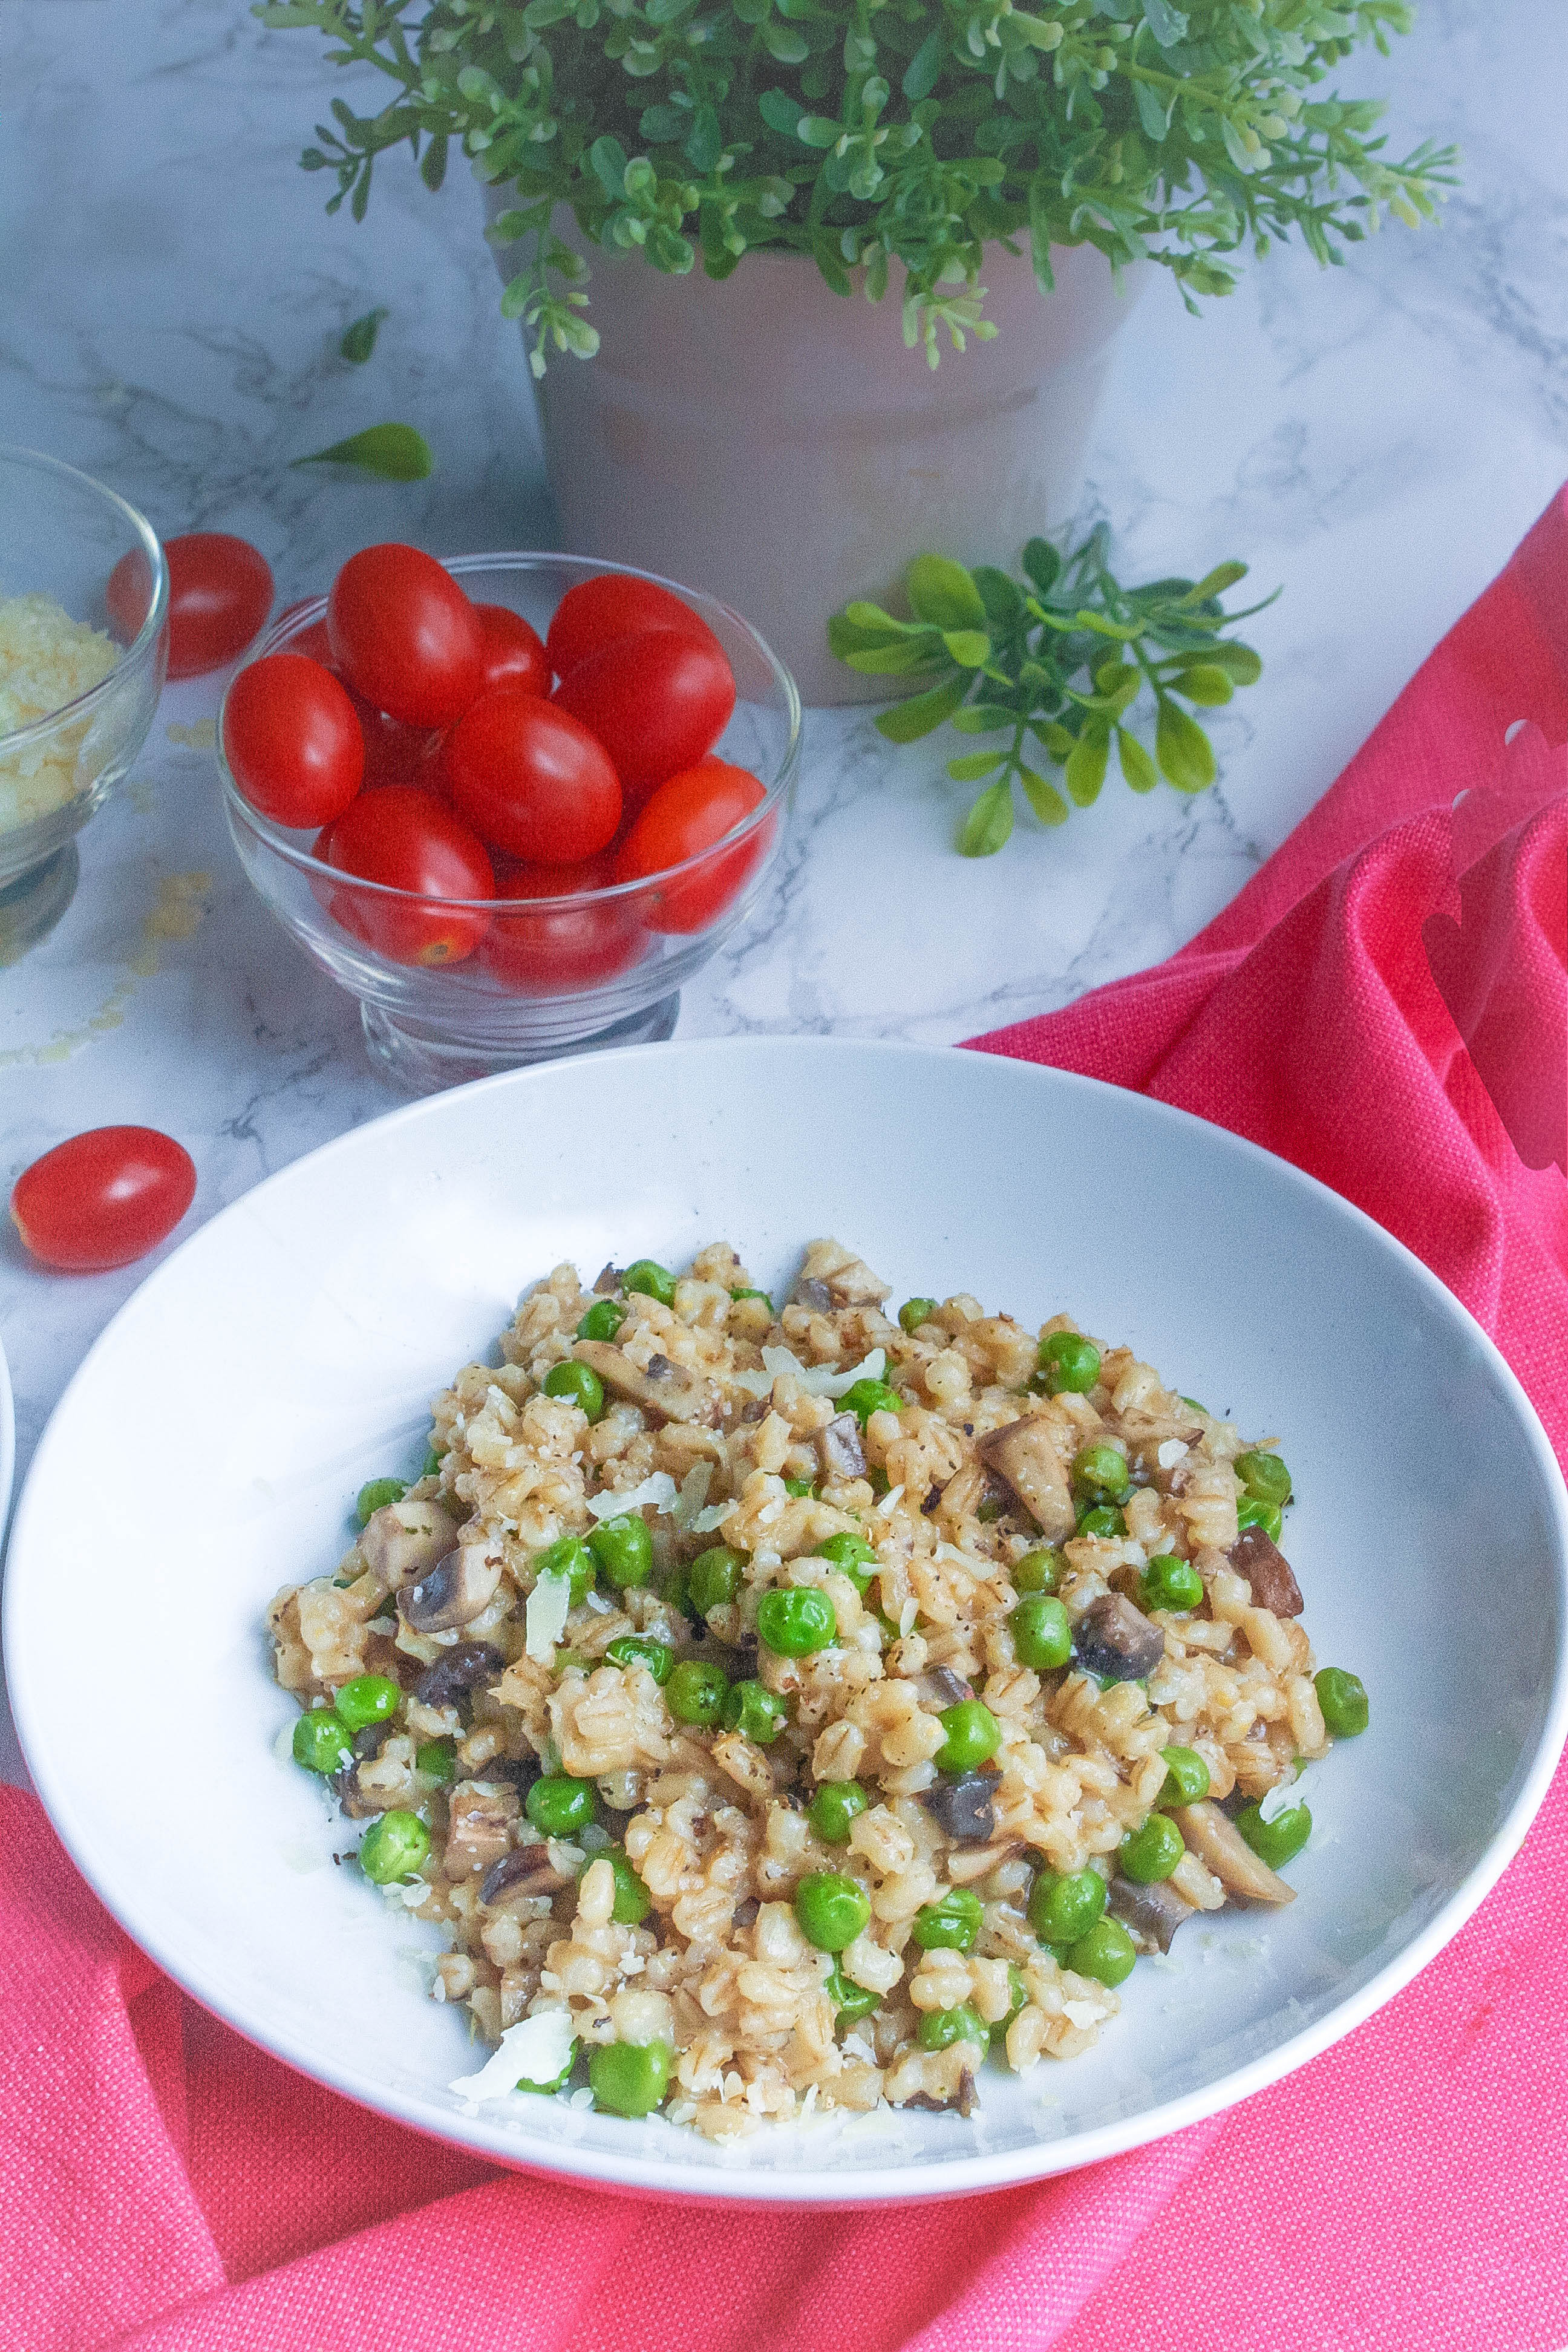 Grab a fork and dig into this delicious Barley Risotto with Mushrooms and Peas. You'll really enjoy how tasty and hearty Barley Risotto with Mushrooms and Peas is!